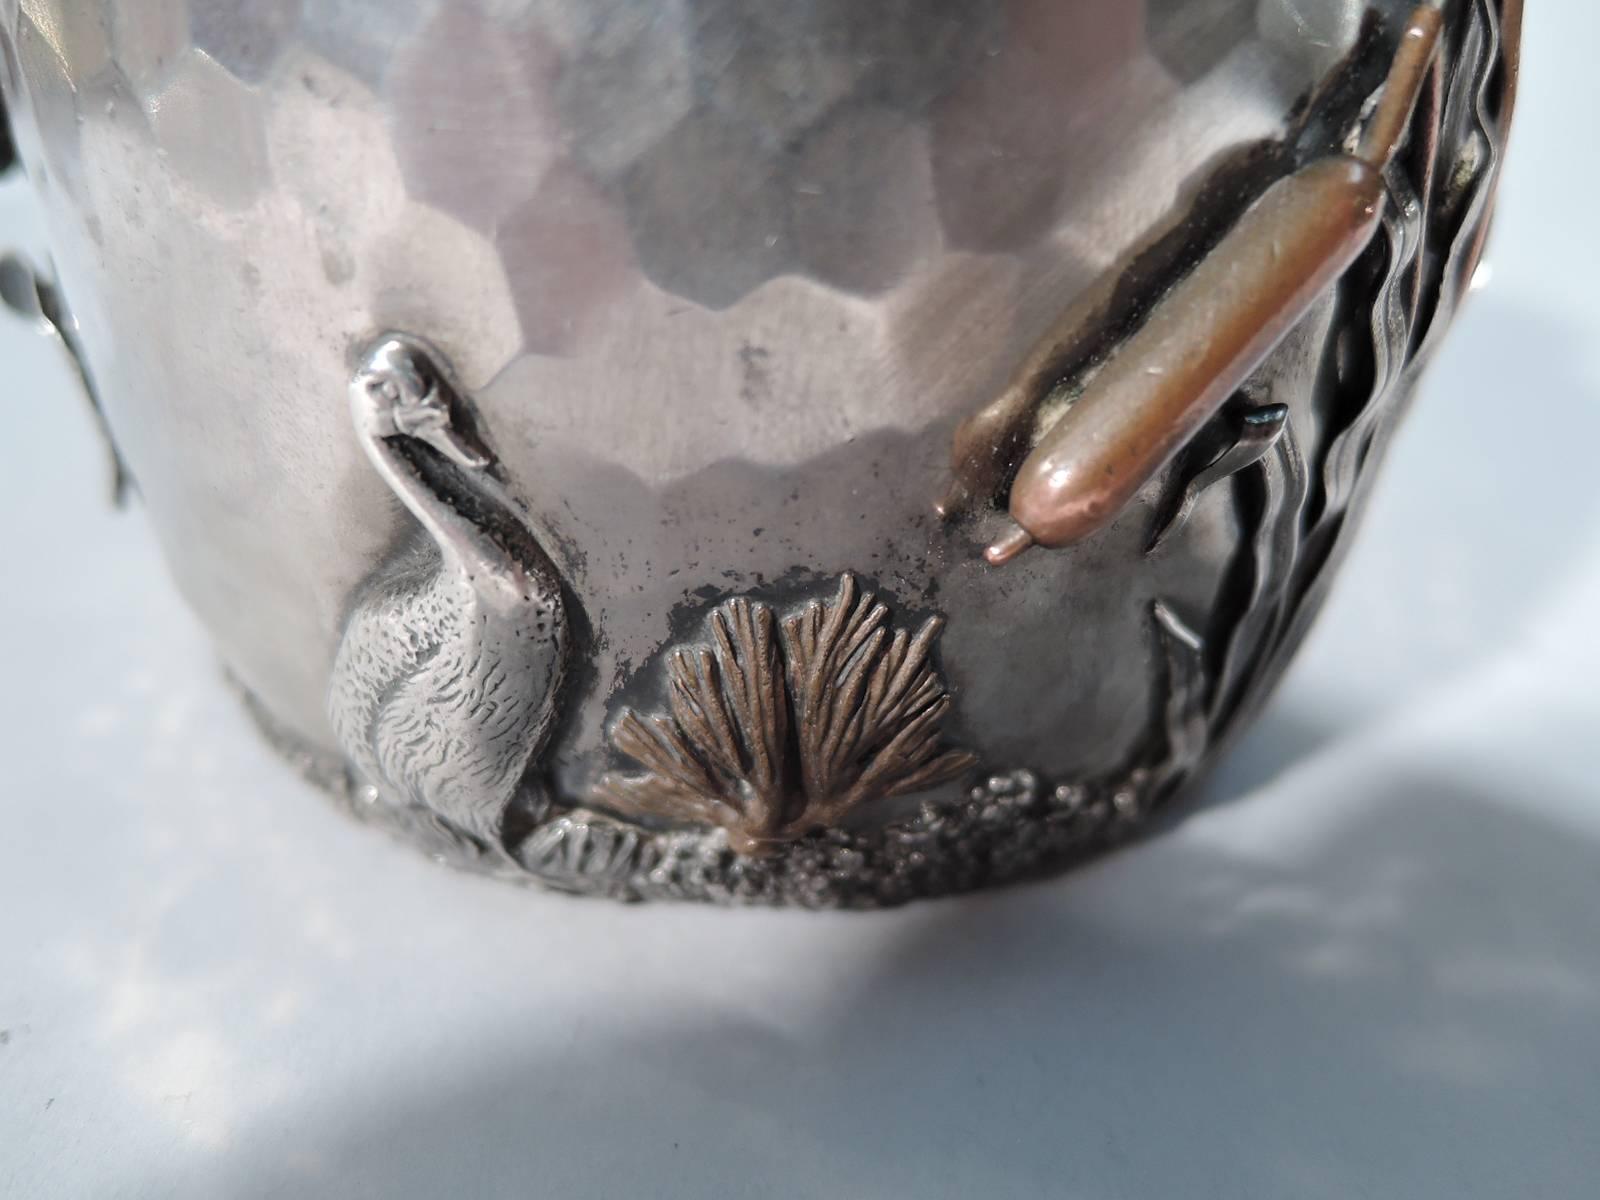 Late 19th Century Fabulous Japonesque Sterling Silver and Mixed Metal Tea Caddy by Gorham